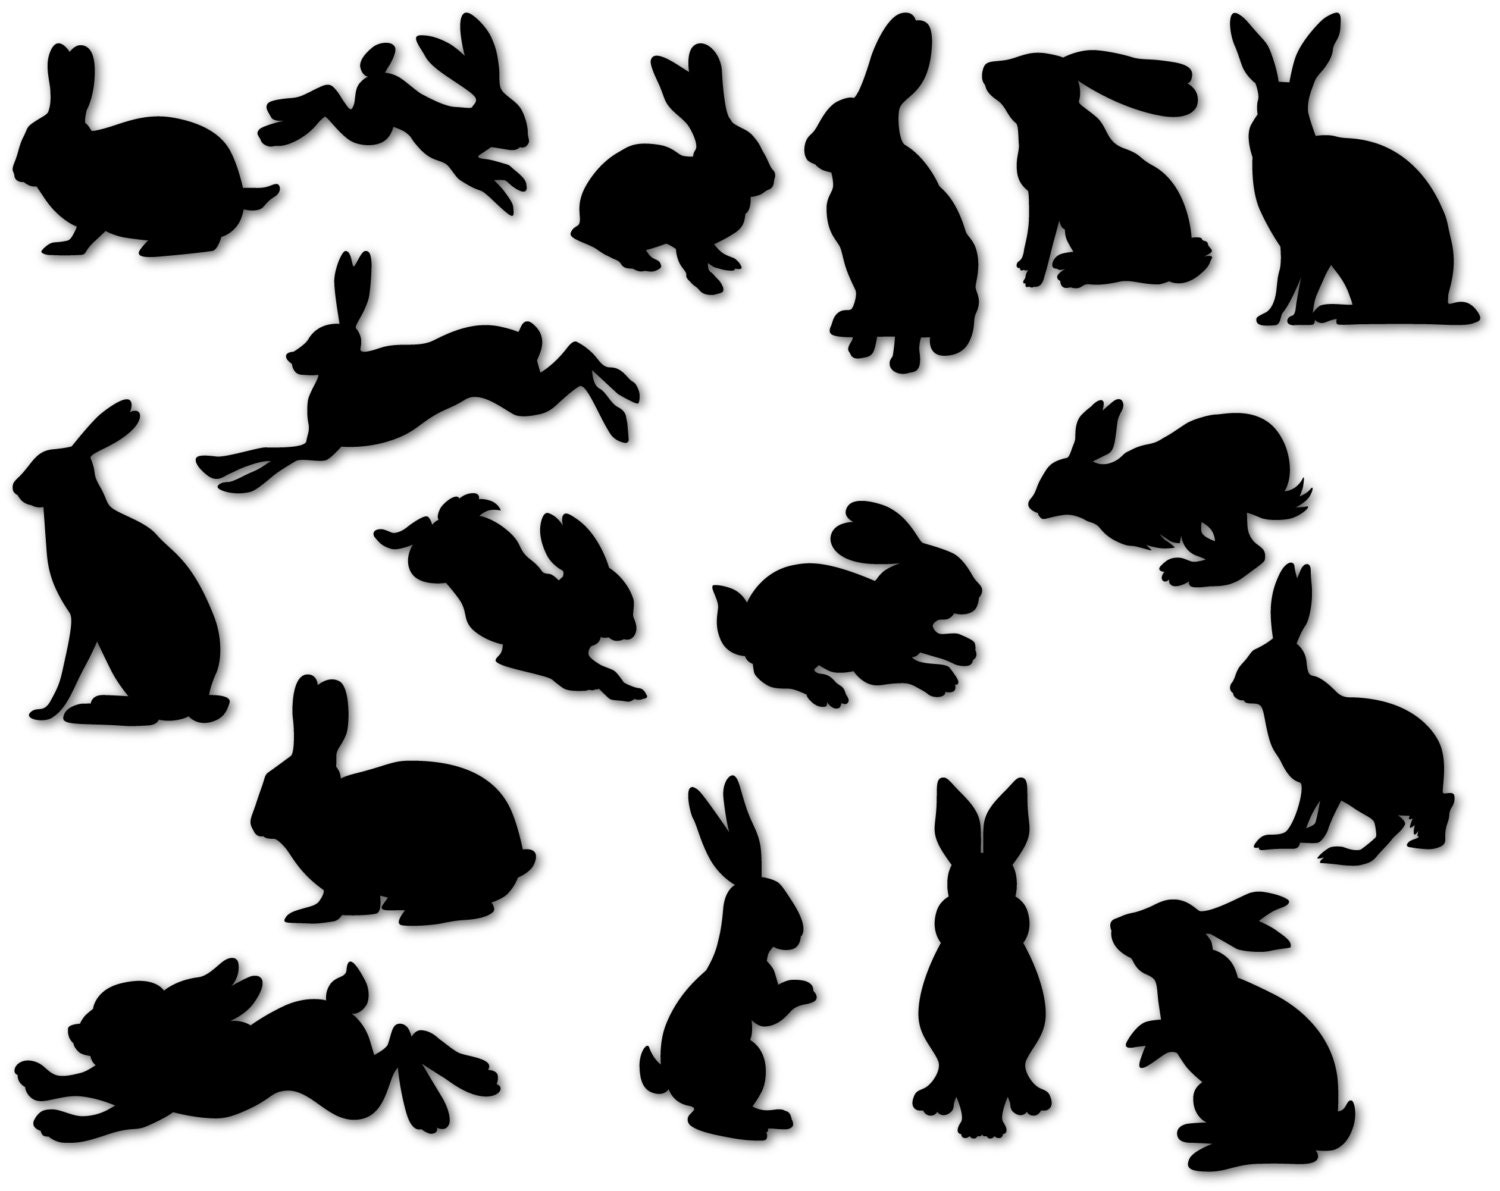 Download Rabbits Silhouettes / Bunny Silhouette / Bunnies svg / Bunny